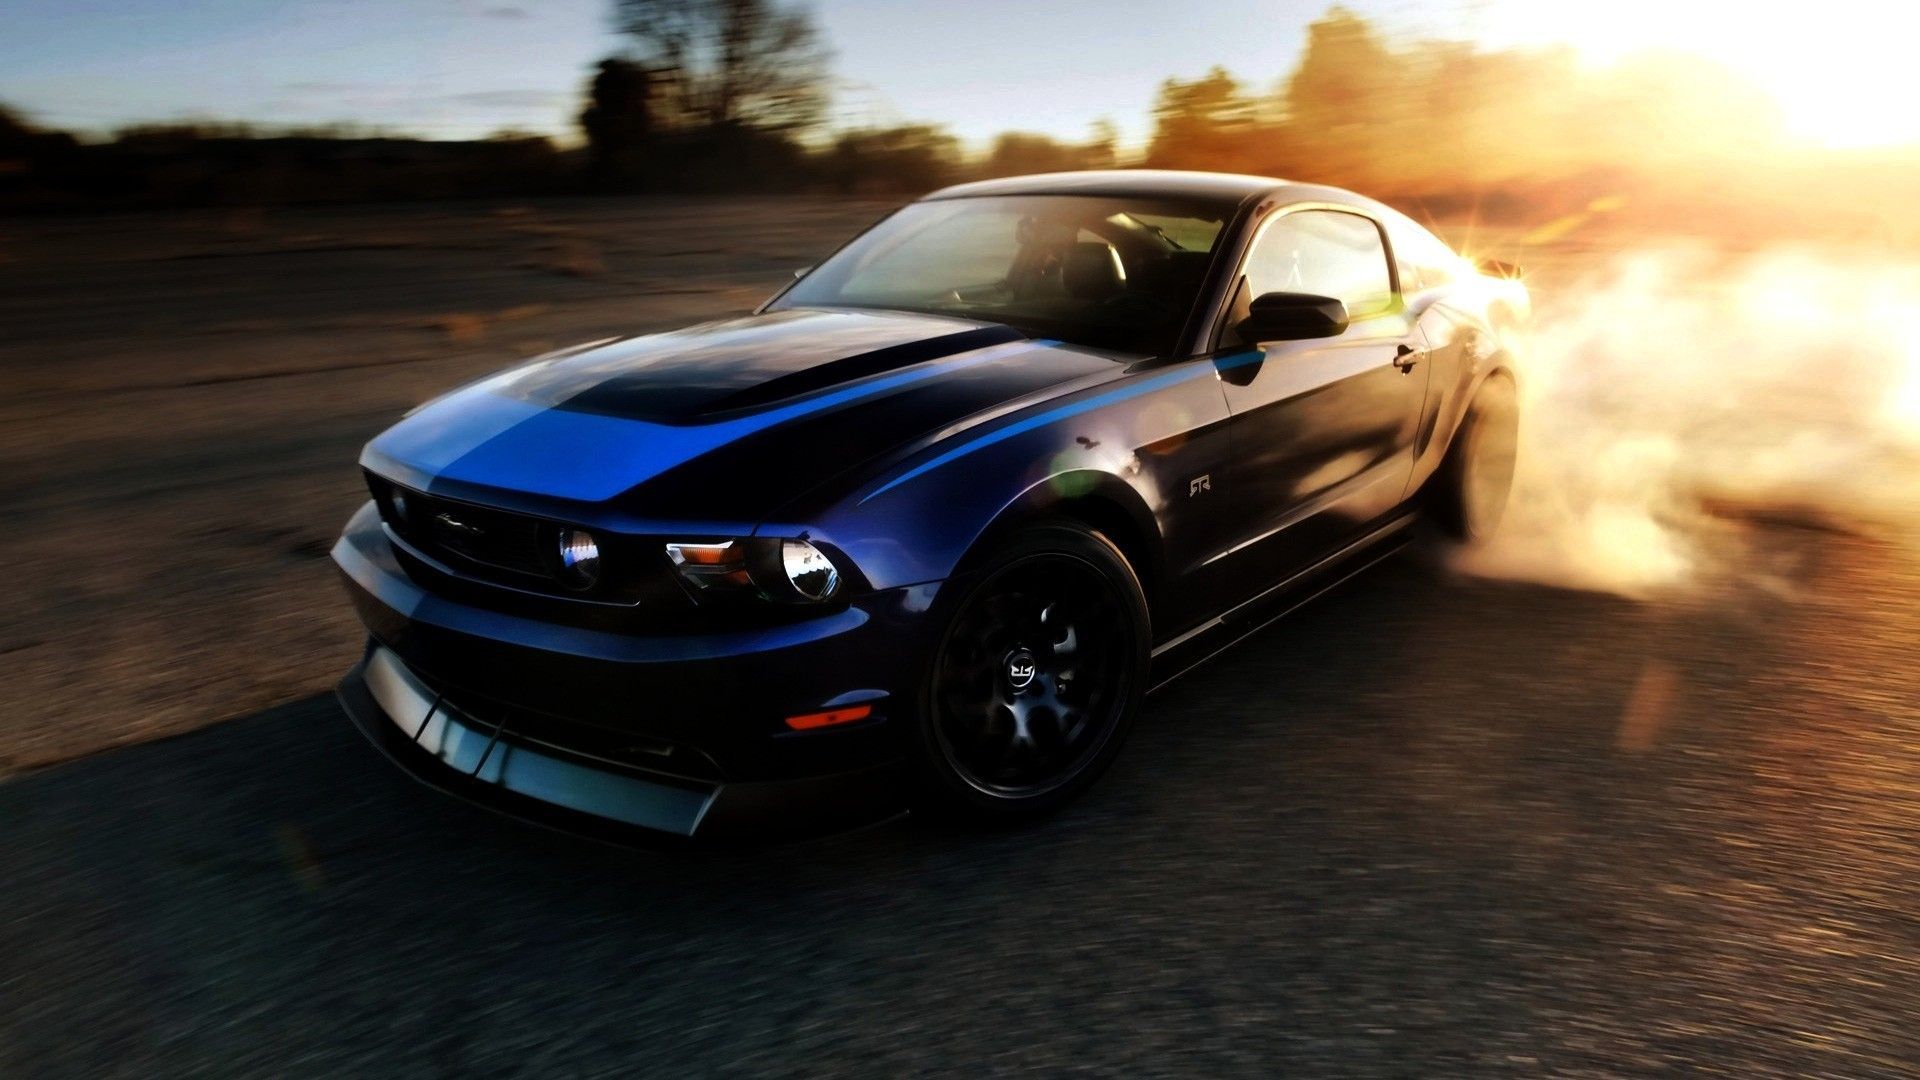 Ford Mustang Windows 8.1 Theme and Desktop All for Windows 10 Free